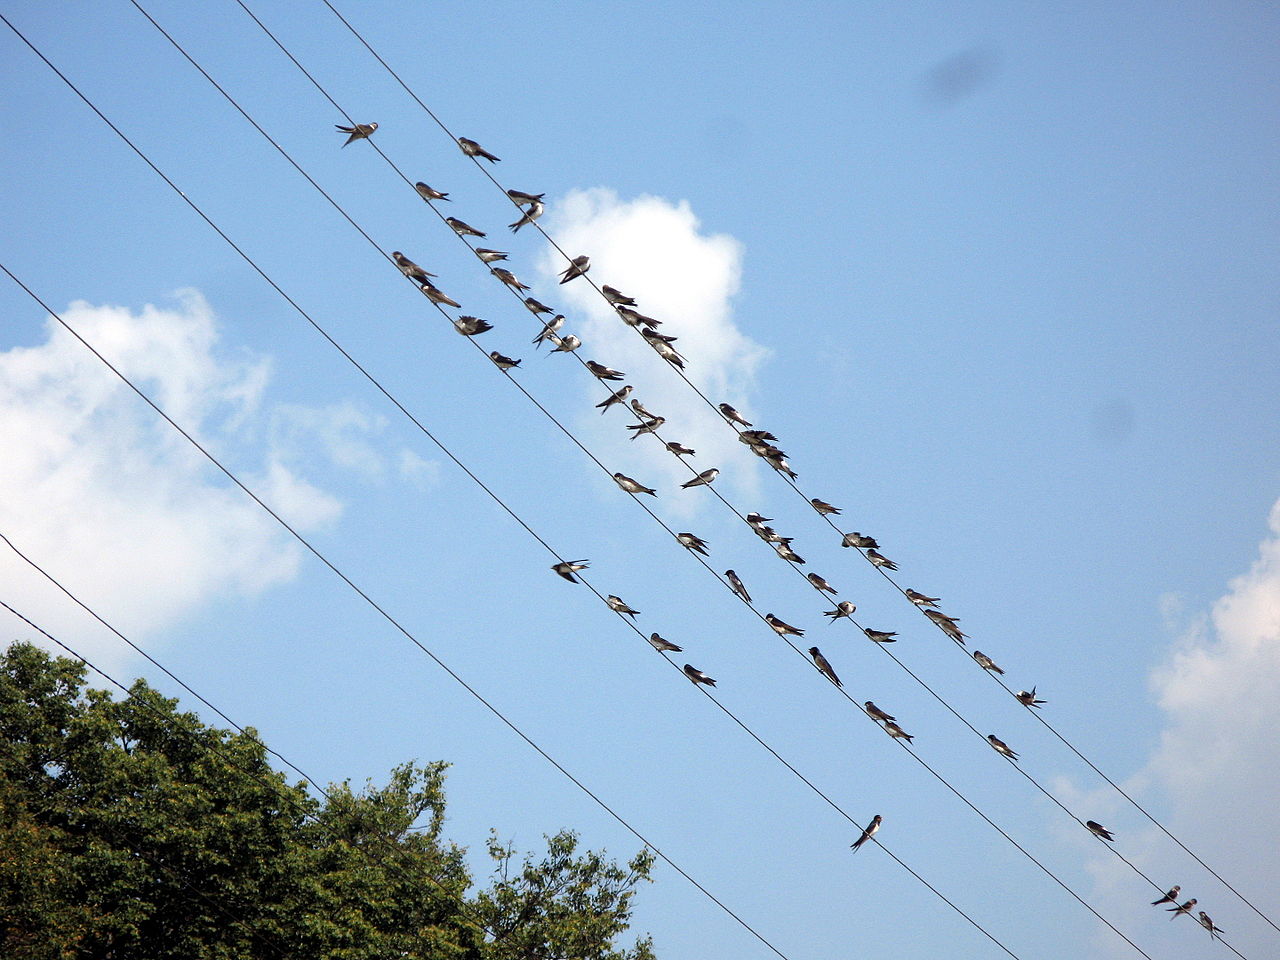 Swallows on the wires